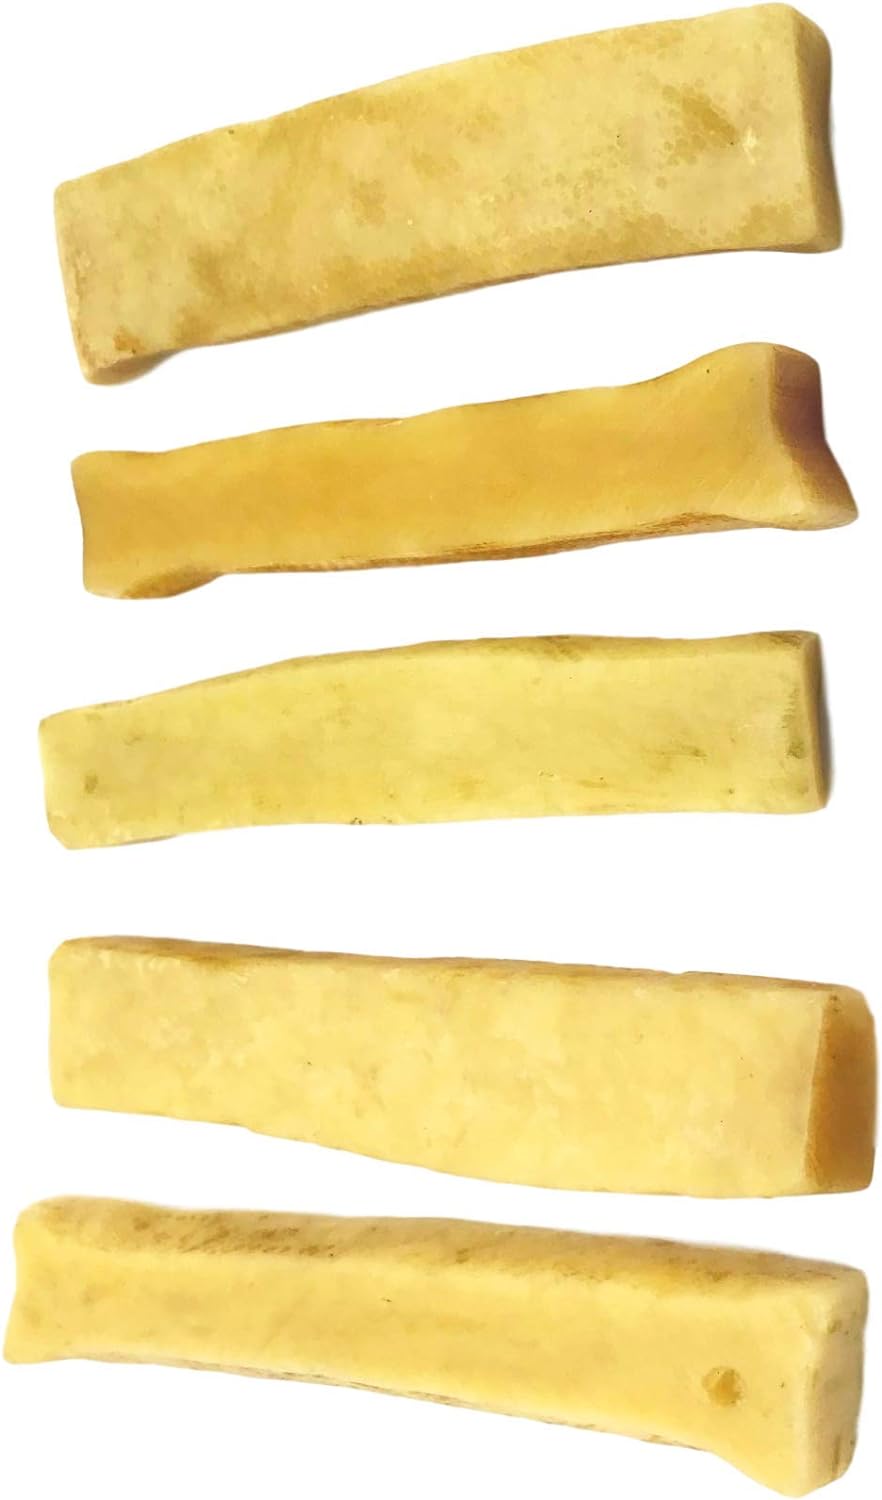 Yak Snak Dog Chews - All Natural Hard Cheese Himalayan Dog Treats - Long Lasting Dog Chews, Made from Yak Milk, Small, Medium. Large & Extra Large Sizes (Extra Small 5-Pack) : Pet Supplies